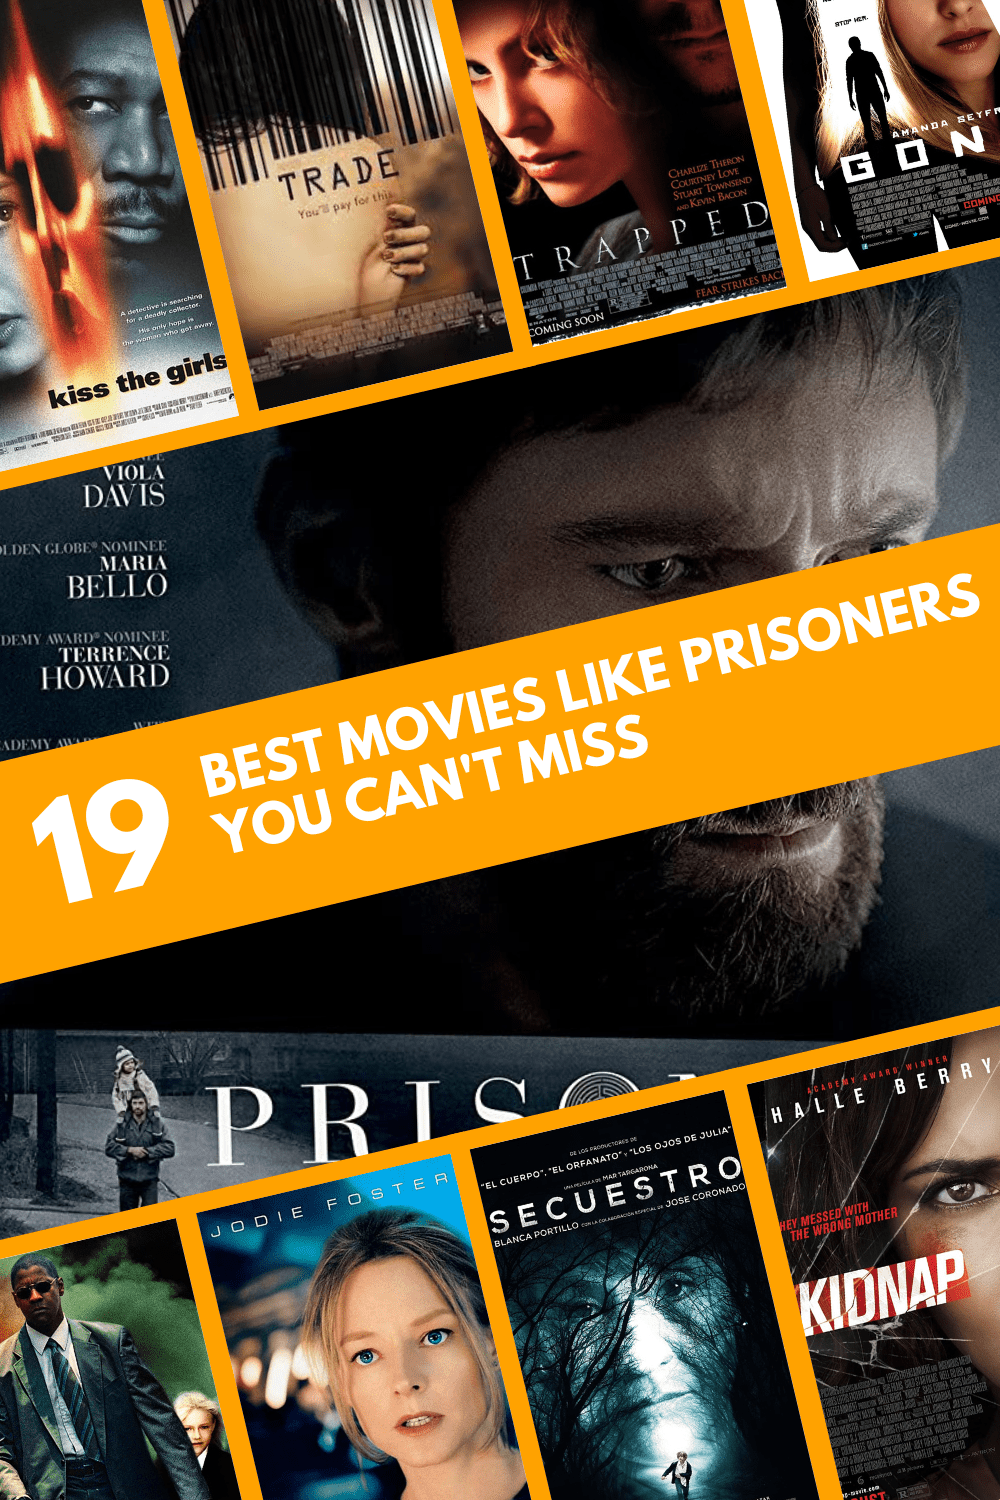 Movie Like Prisoners You Can't Miss